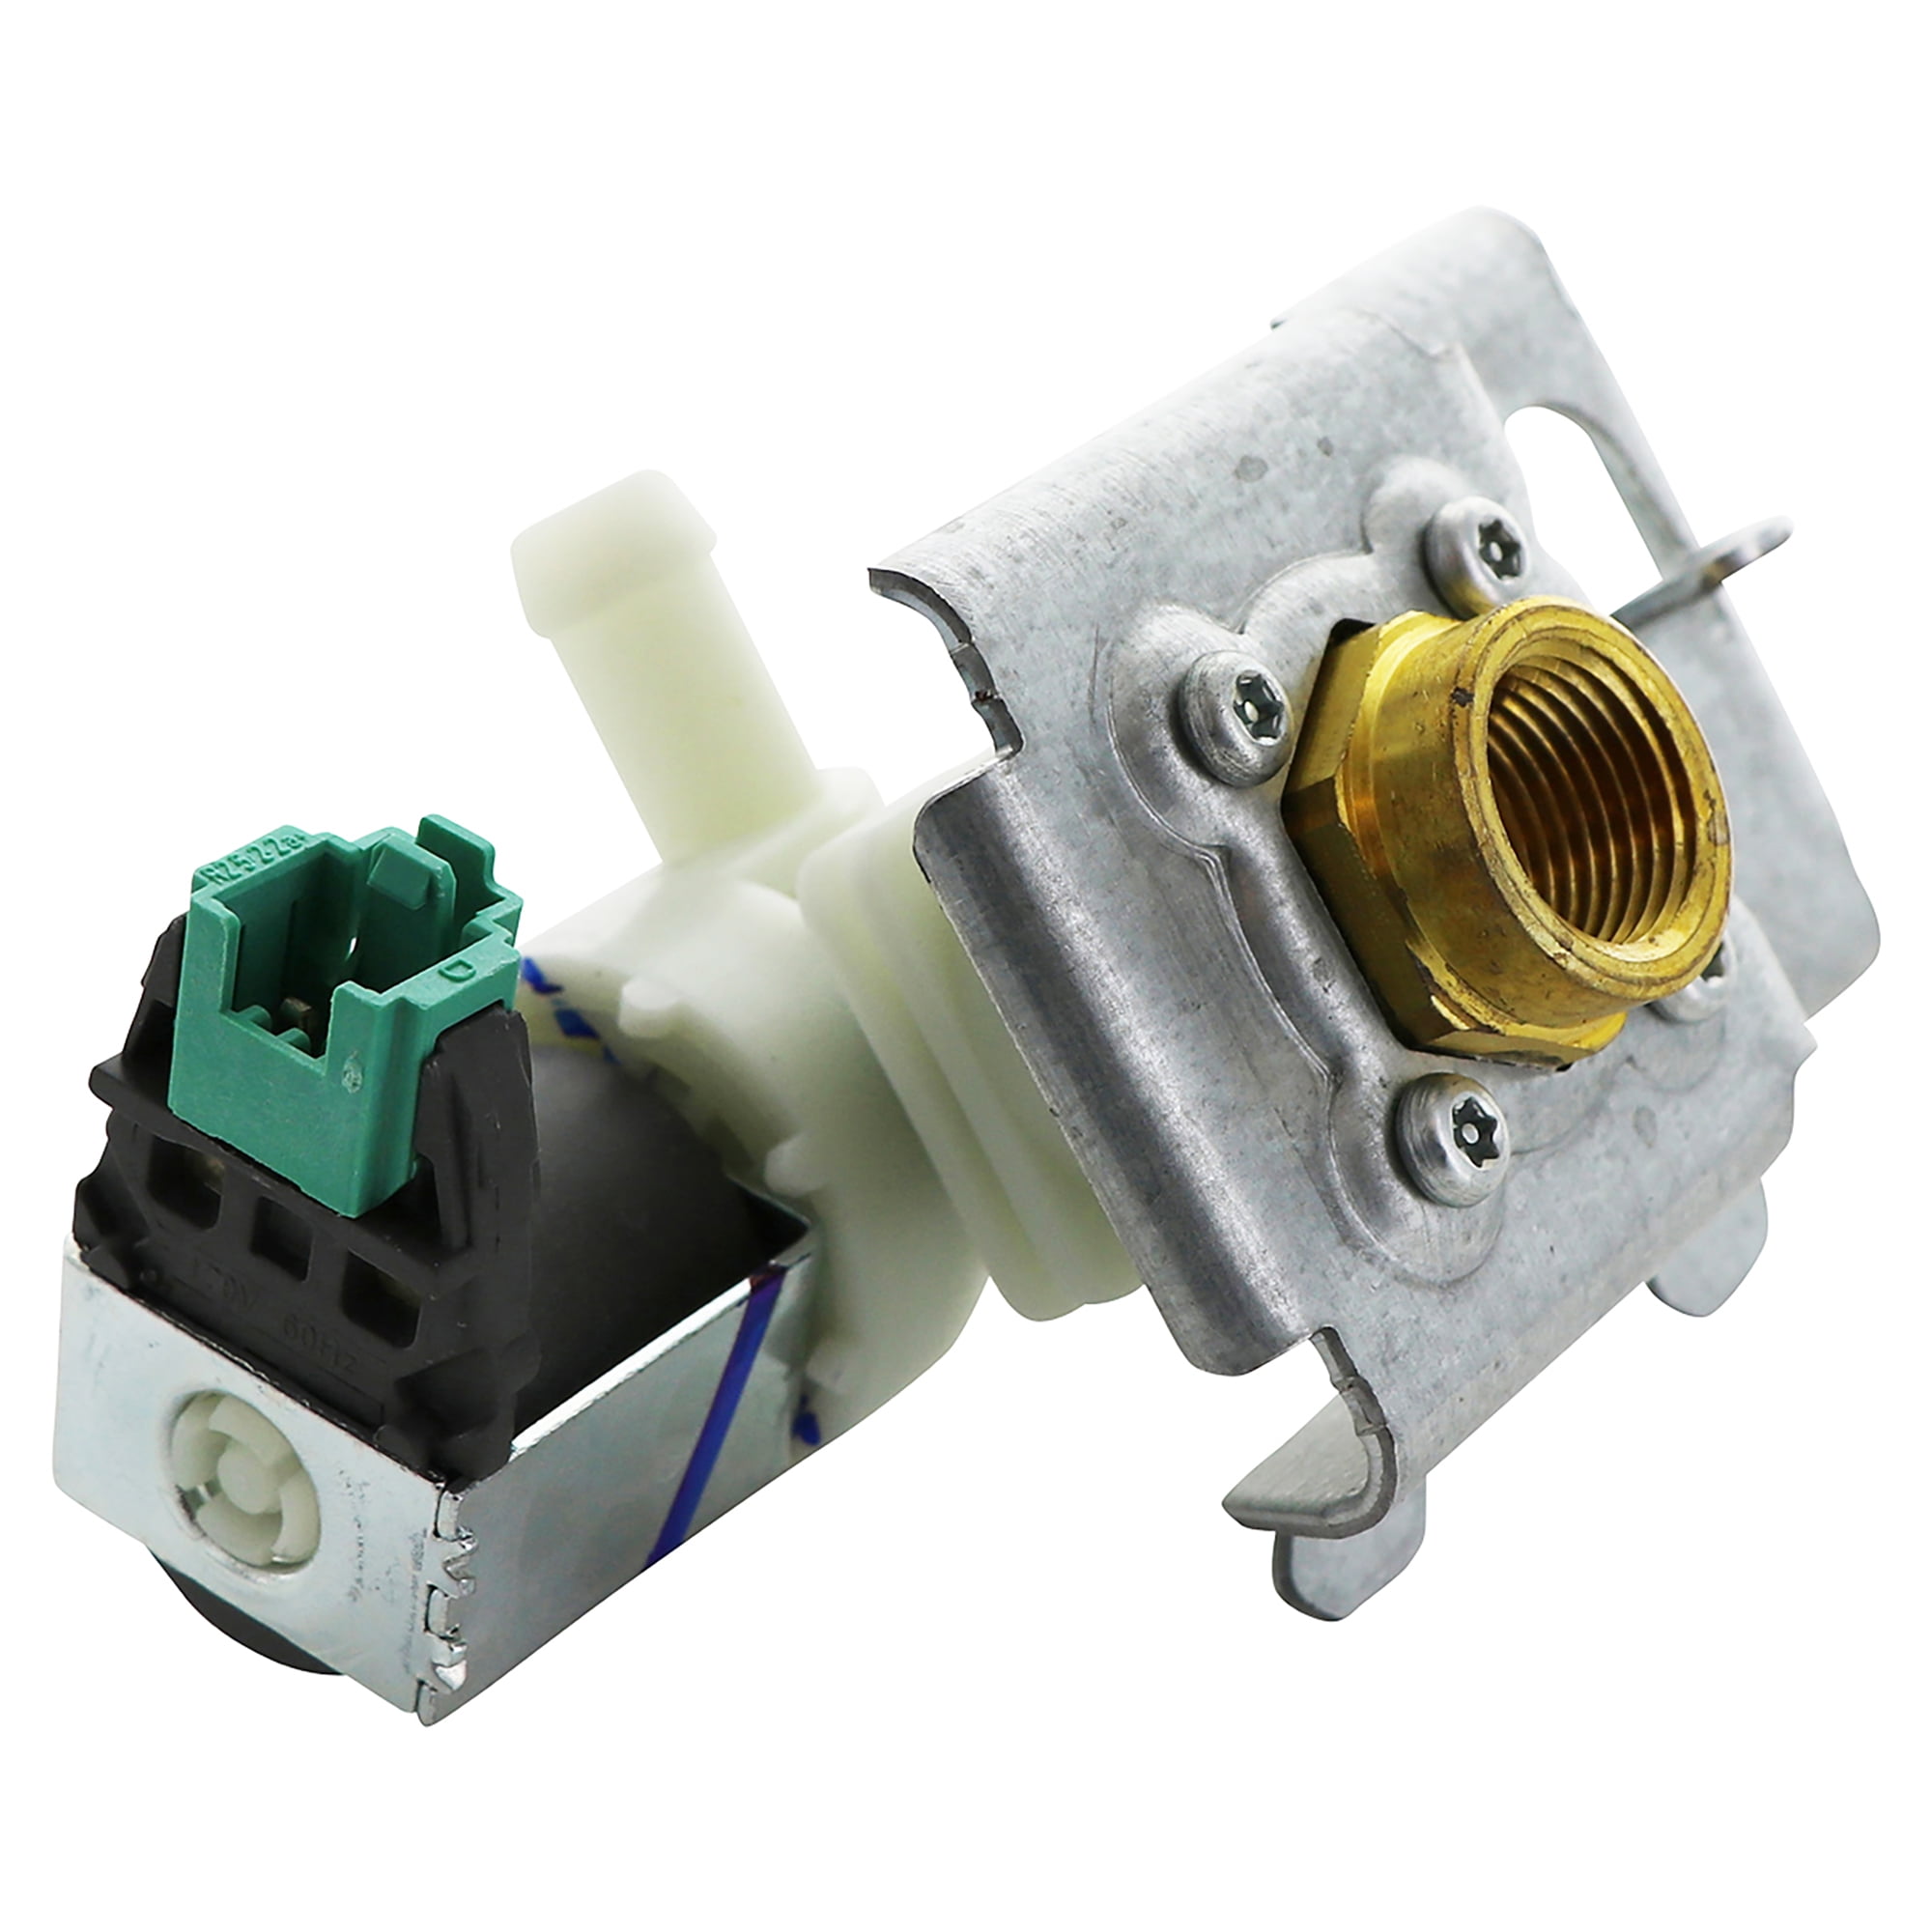 NEW Replacement for Whirlpool W10158389 Water Valve for Dishwasher 